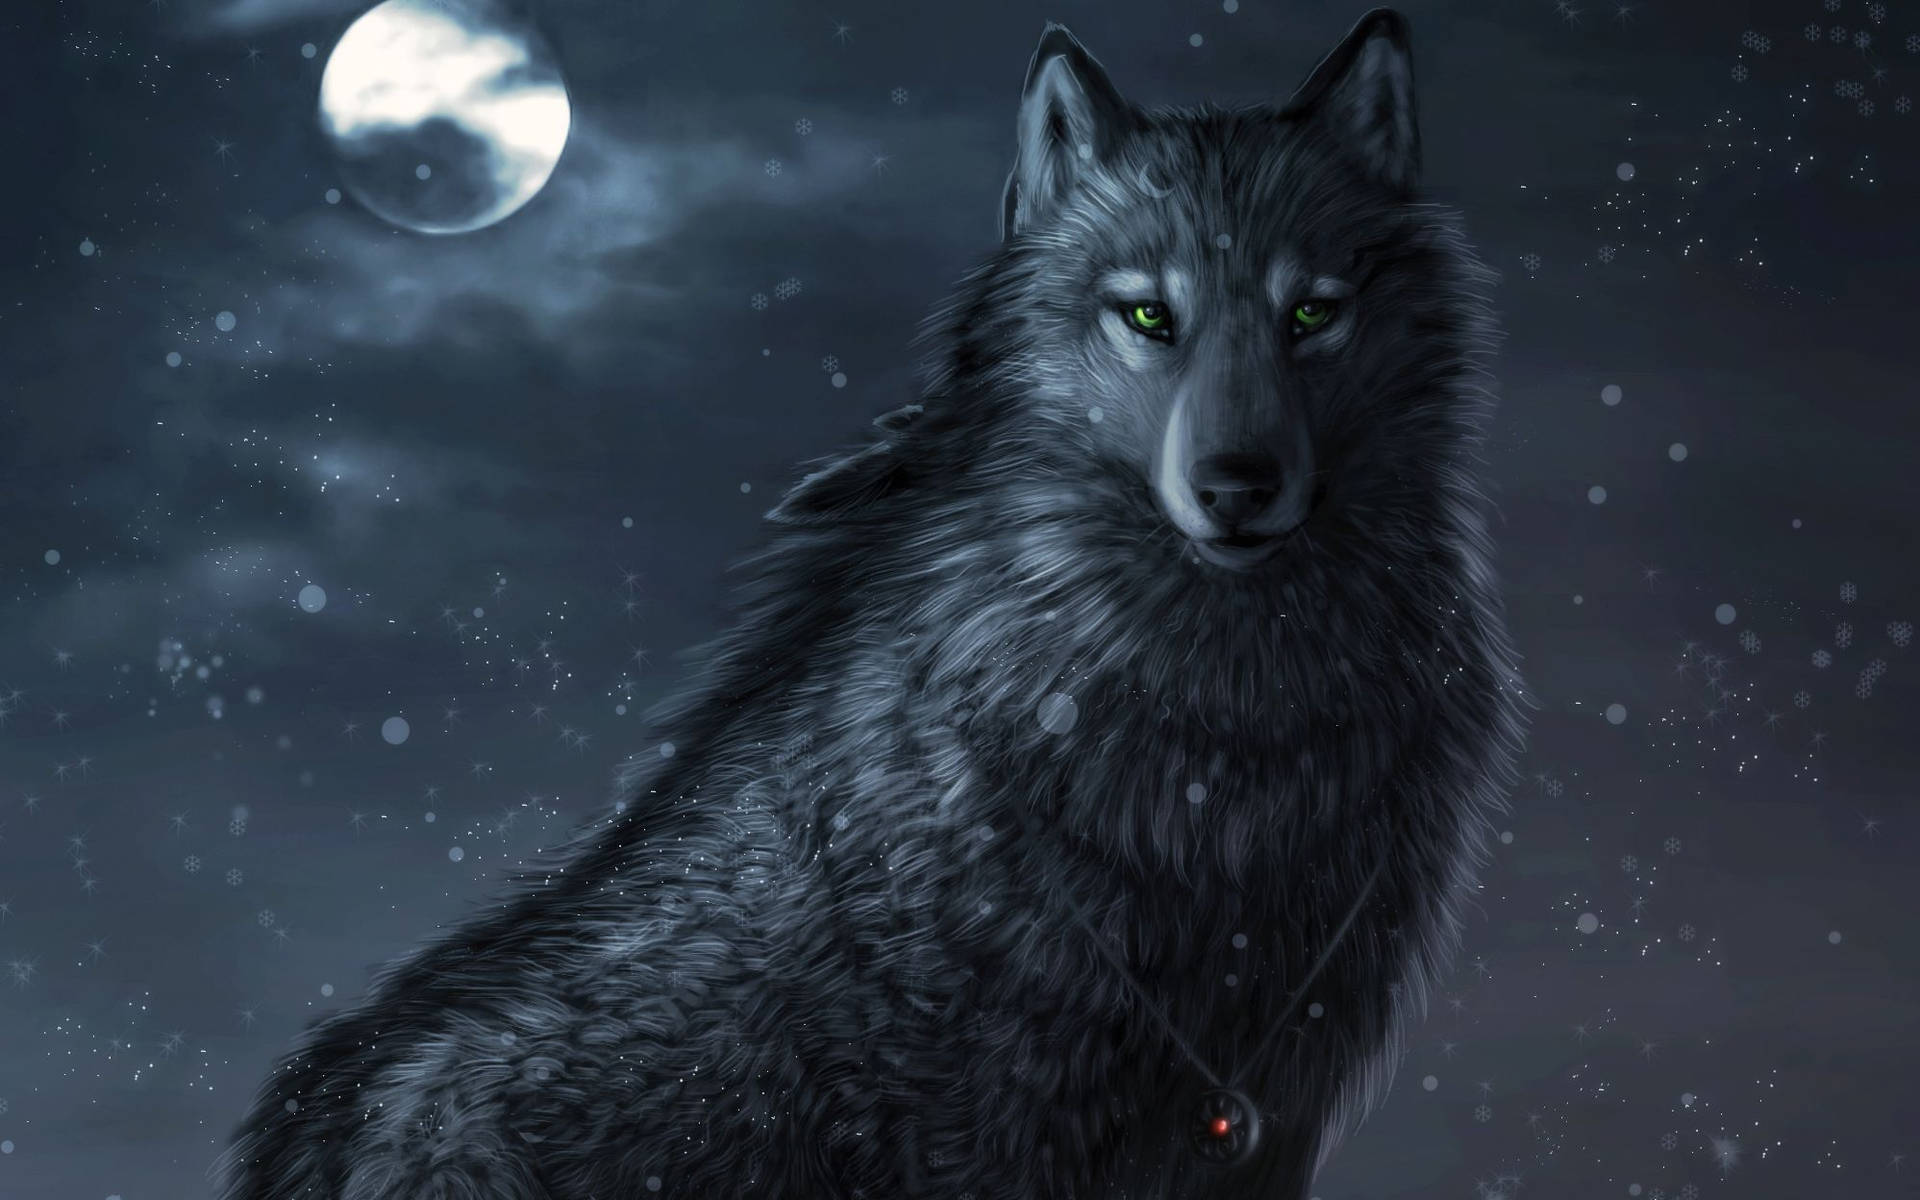 Free Black Wolf Wallpaper Downloads, [100+] Black Wolf Wallpapers for FREE  